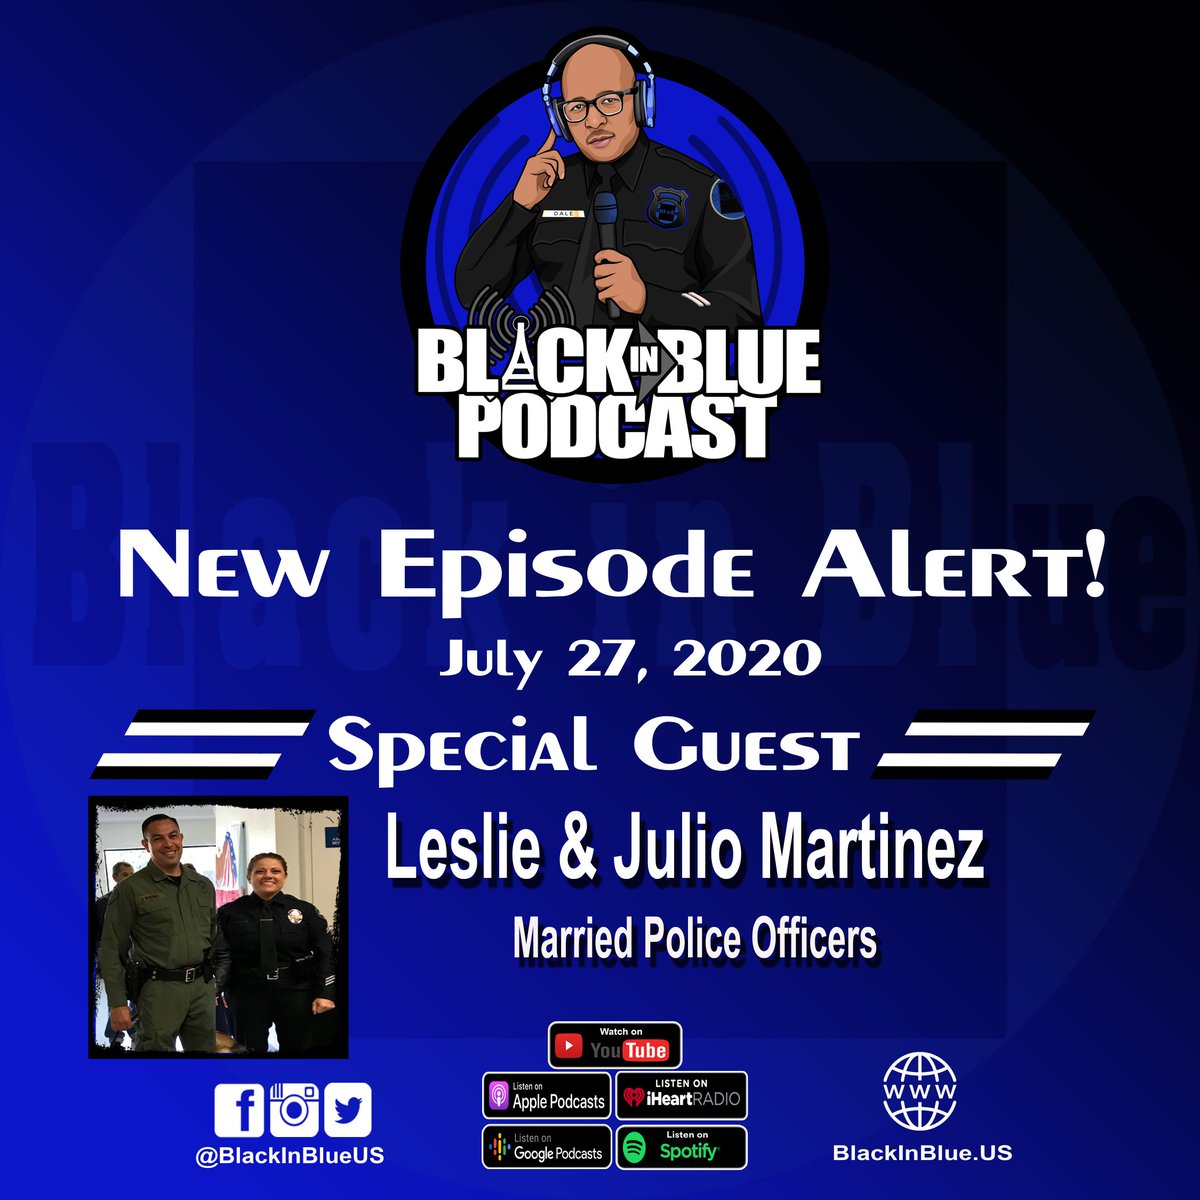 If you saw Black in Blue Live and want some more Latin Heat, a new episode of the Black in Blue Podcast drops tomorrow with Latino married cop couple Leslie & Julio Martinez. Check it out on YouTube and all podcast platforms.
#NewEpisode #Podcast #CopCouple #Latinos #BrownCops